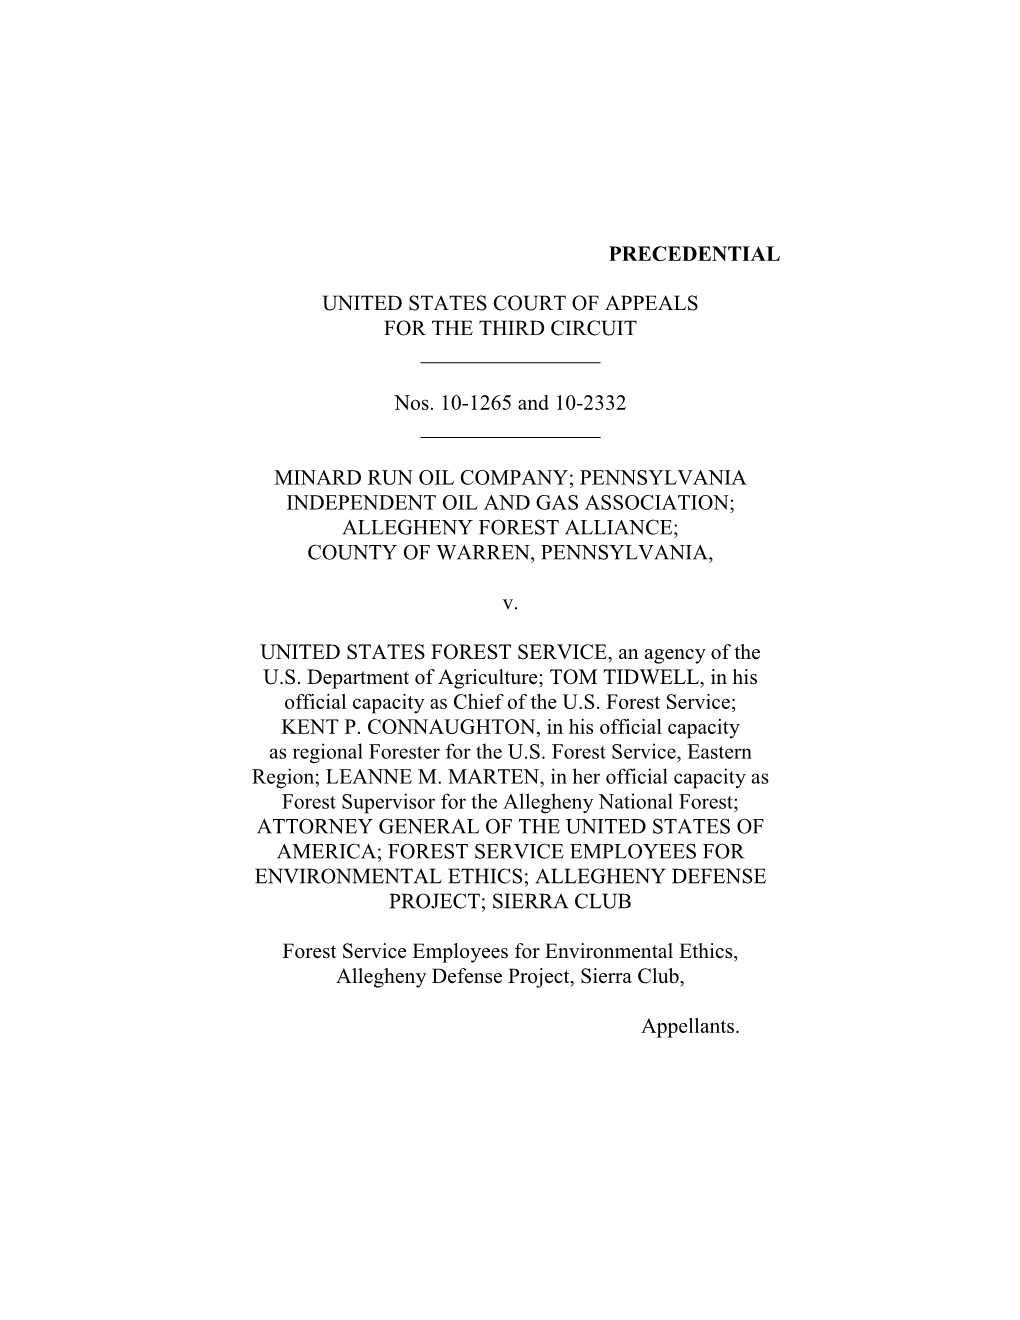 PRECEDENTIAL UNITED STATES COURT of APPEALS for the THIRD CIRCUIT Nos. 10-1265 and 10-2332 MINARD RUN OIL COMPANY; PENNSYLVANIA